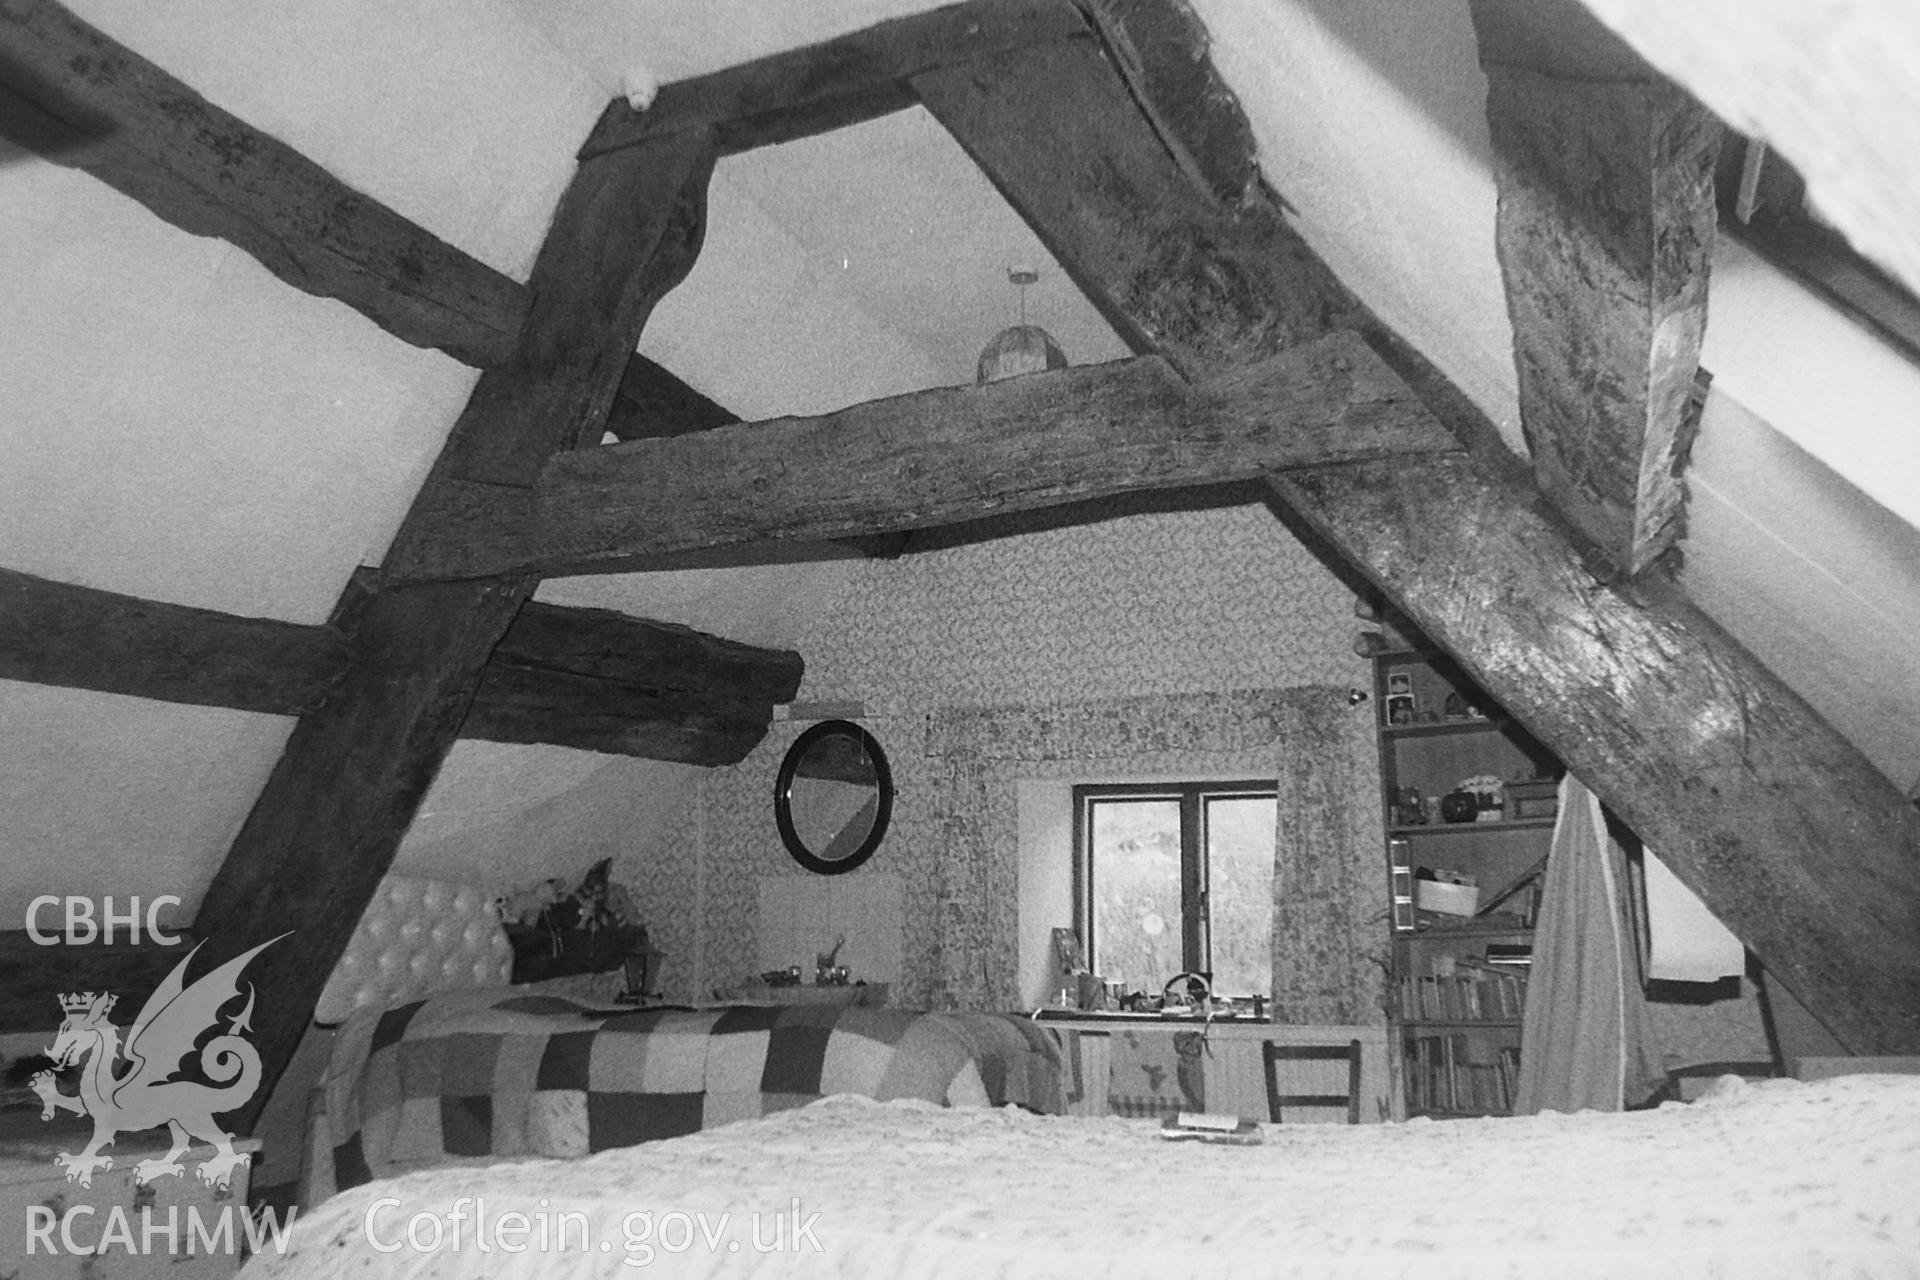 Black and white photo showing interior view of Chapel Farm, taken by Paul R. Davis, undated.